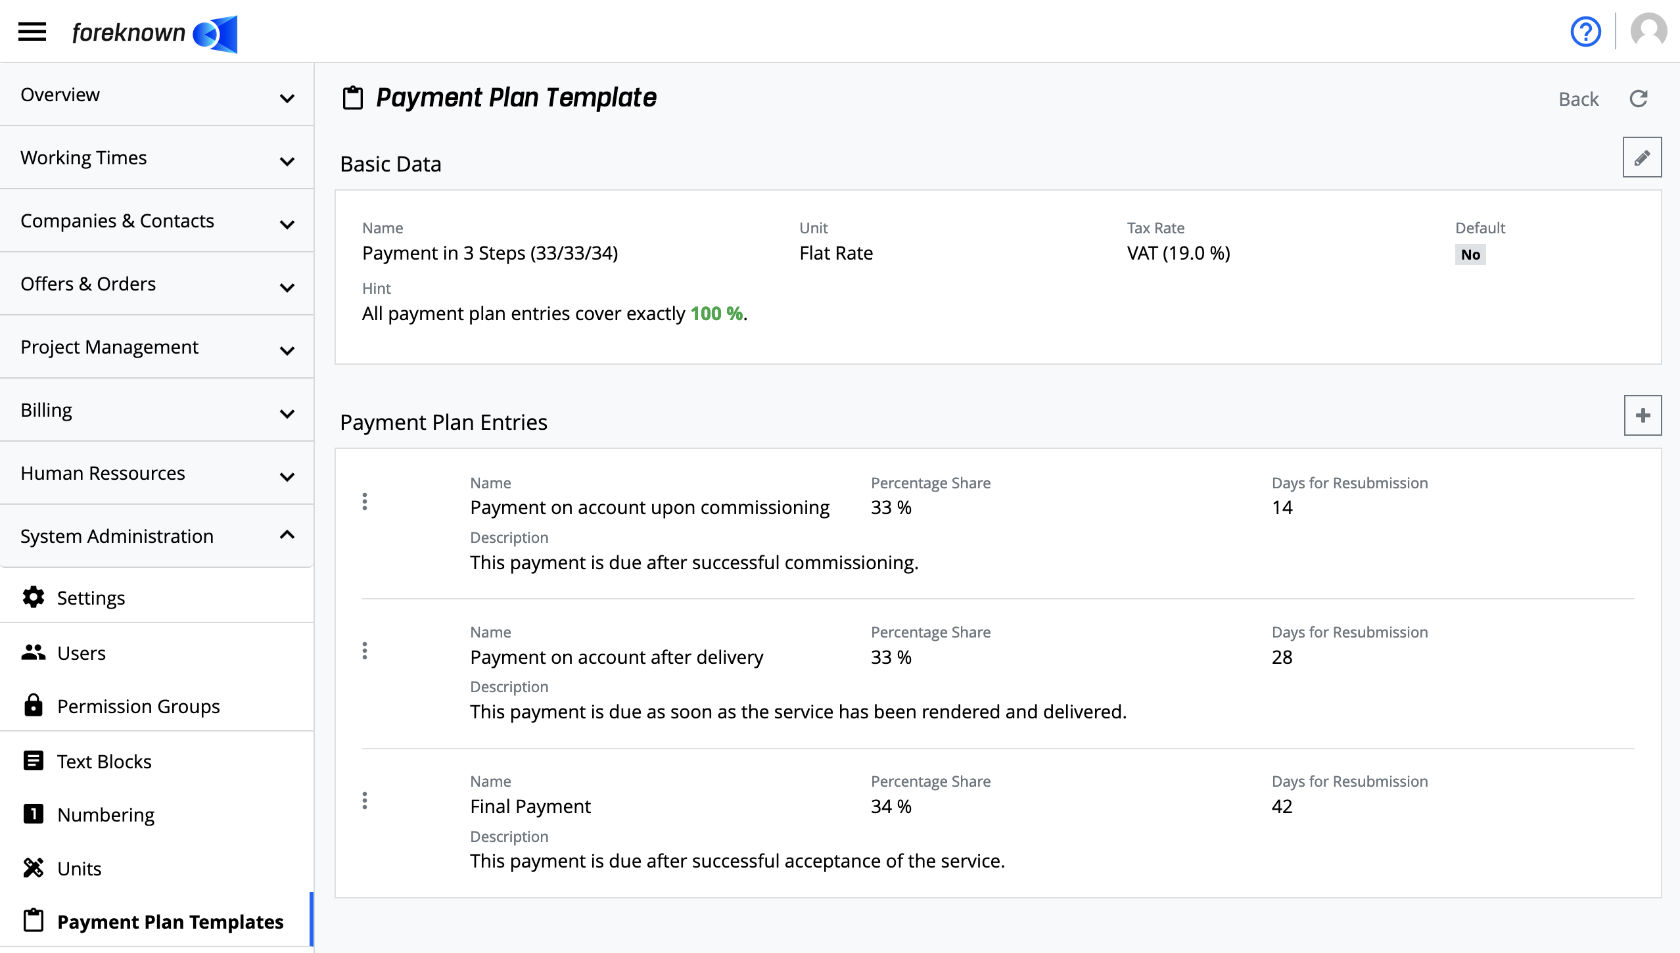 Details of a Payment Plan Template